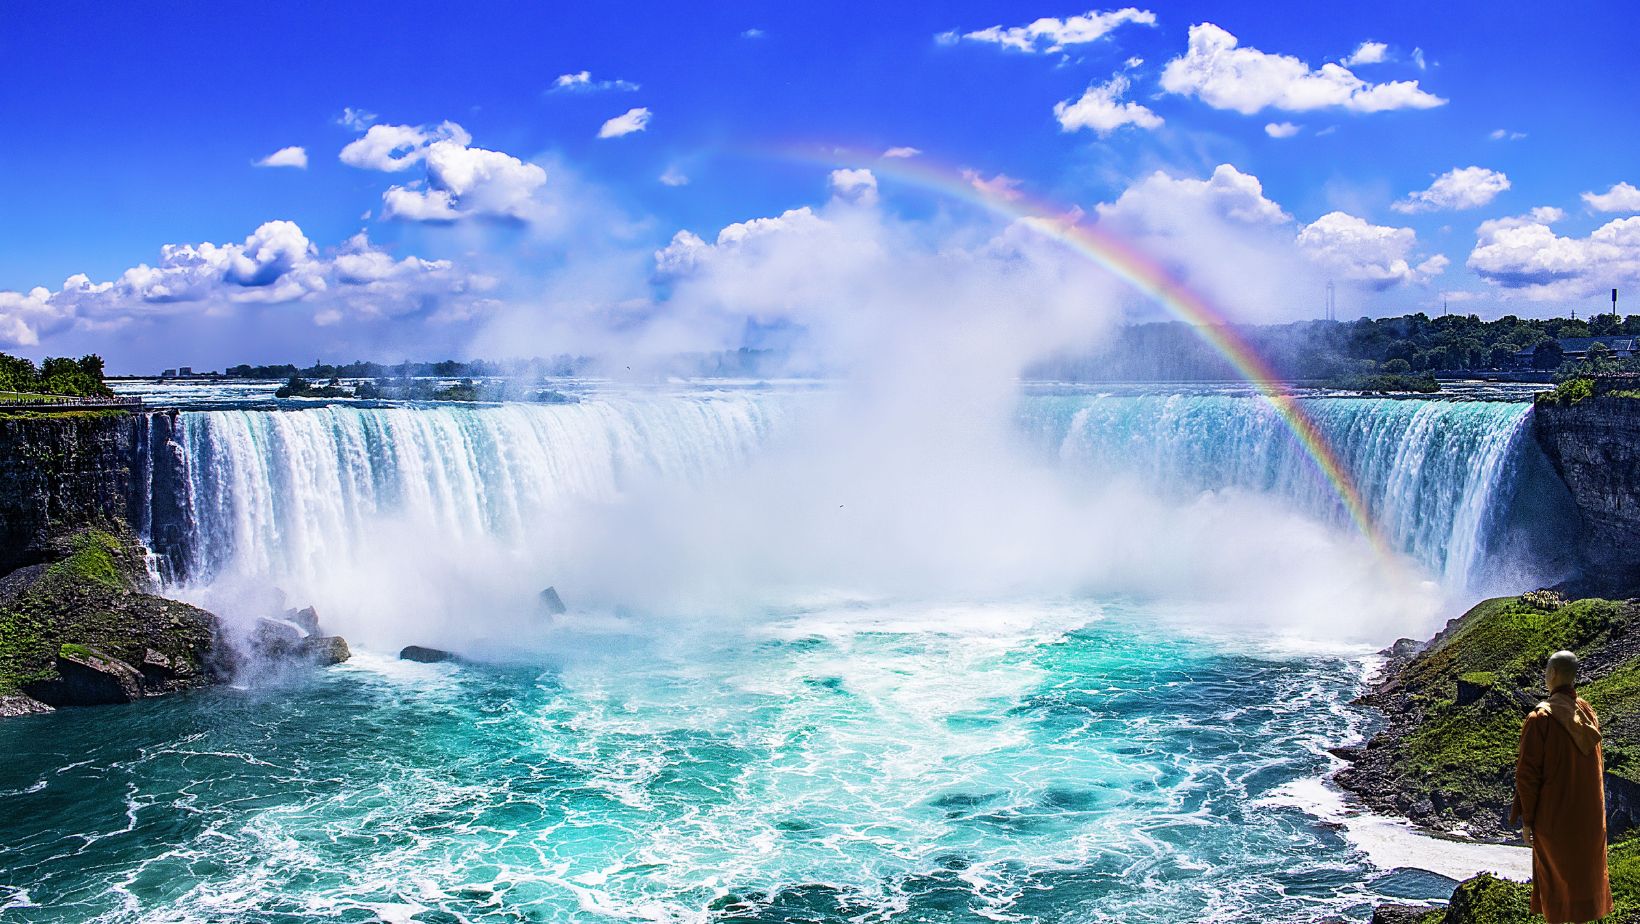 Places to Stay in Niagara Falls